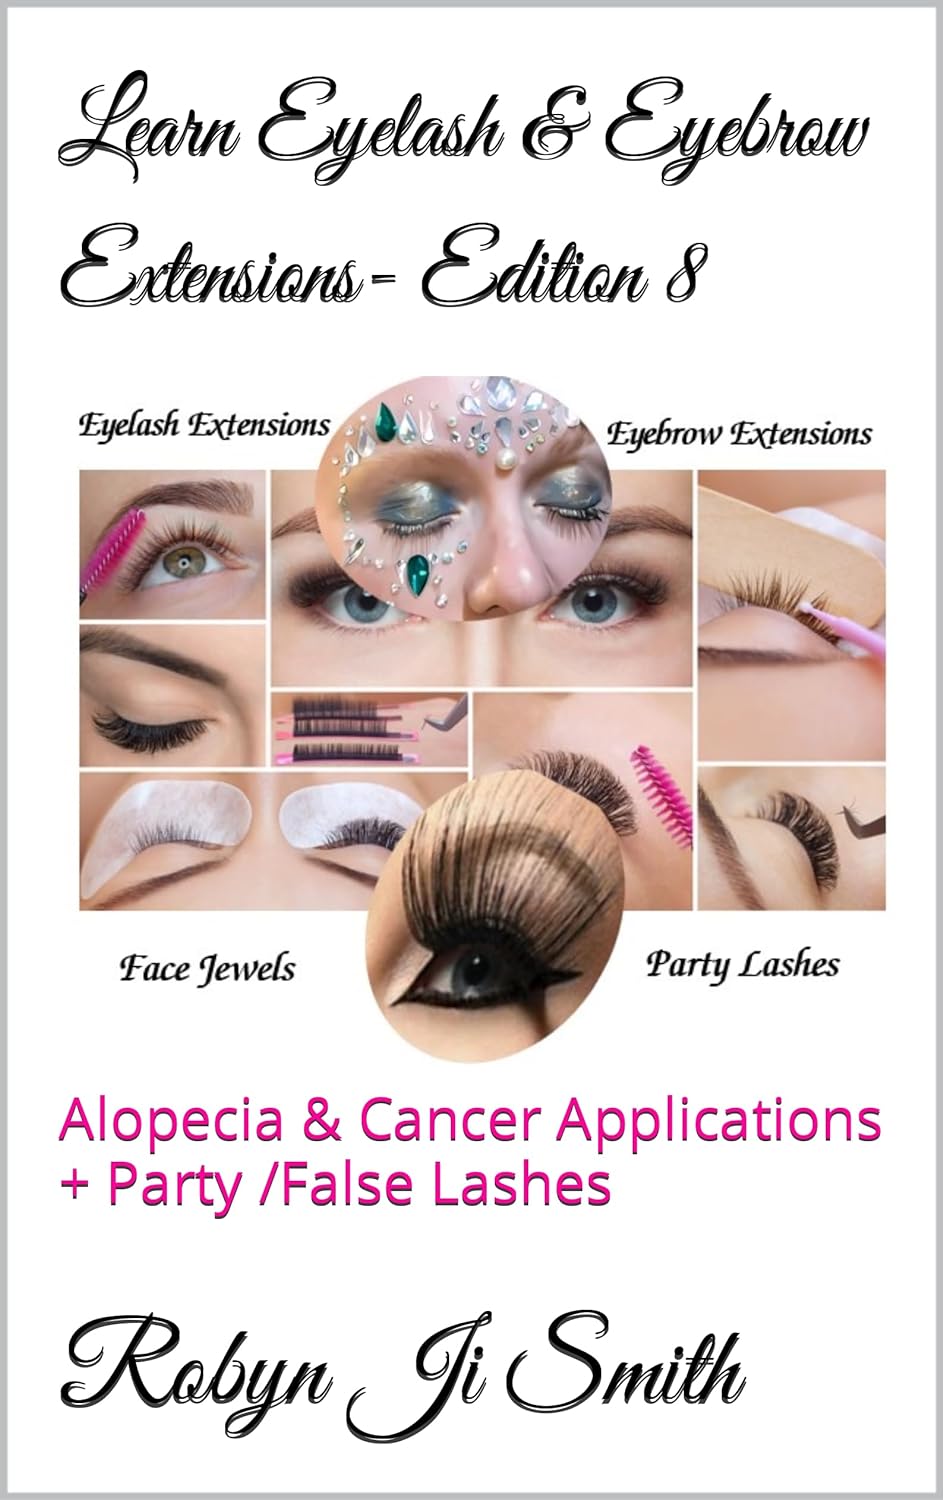 Learn Eyelash  Eyebrow Extensions- Edition 8: Alopecia  Cancer Applications + Party /False Lashes (Beauty School Books Training Manuals For Beauty Pathways Academy Book 17)     Kindle Edition